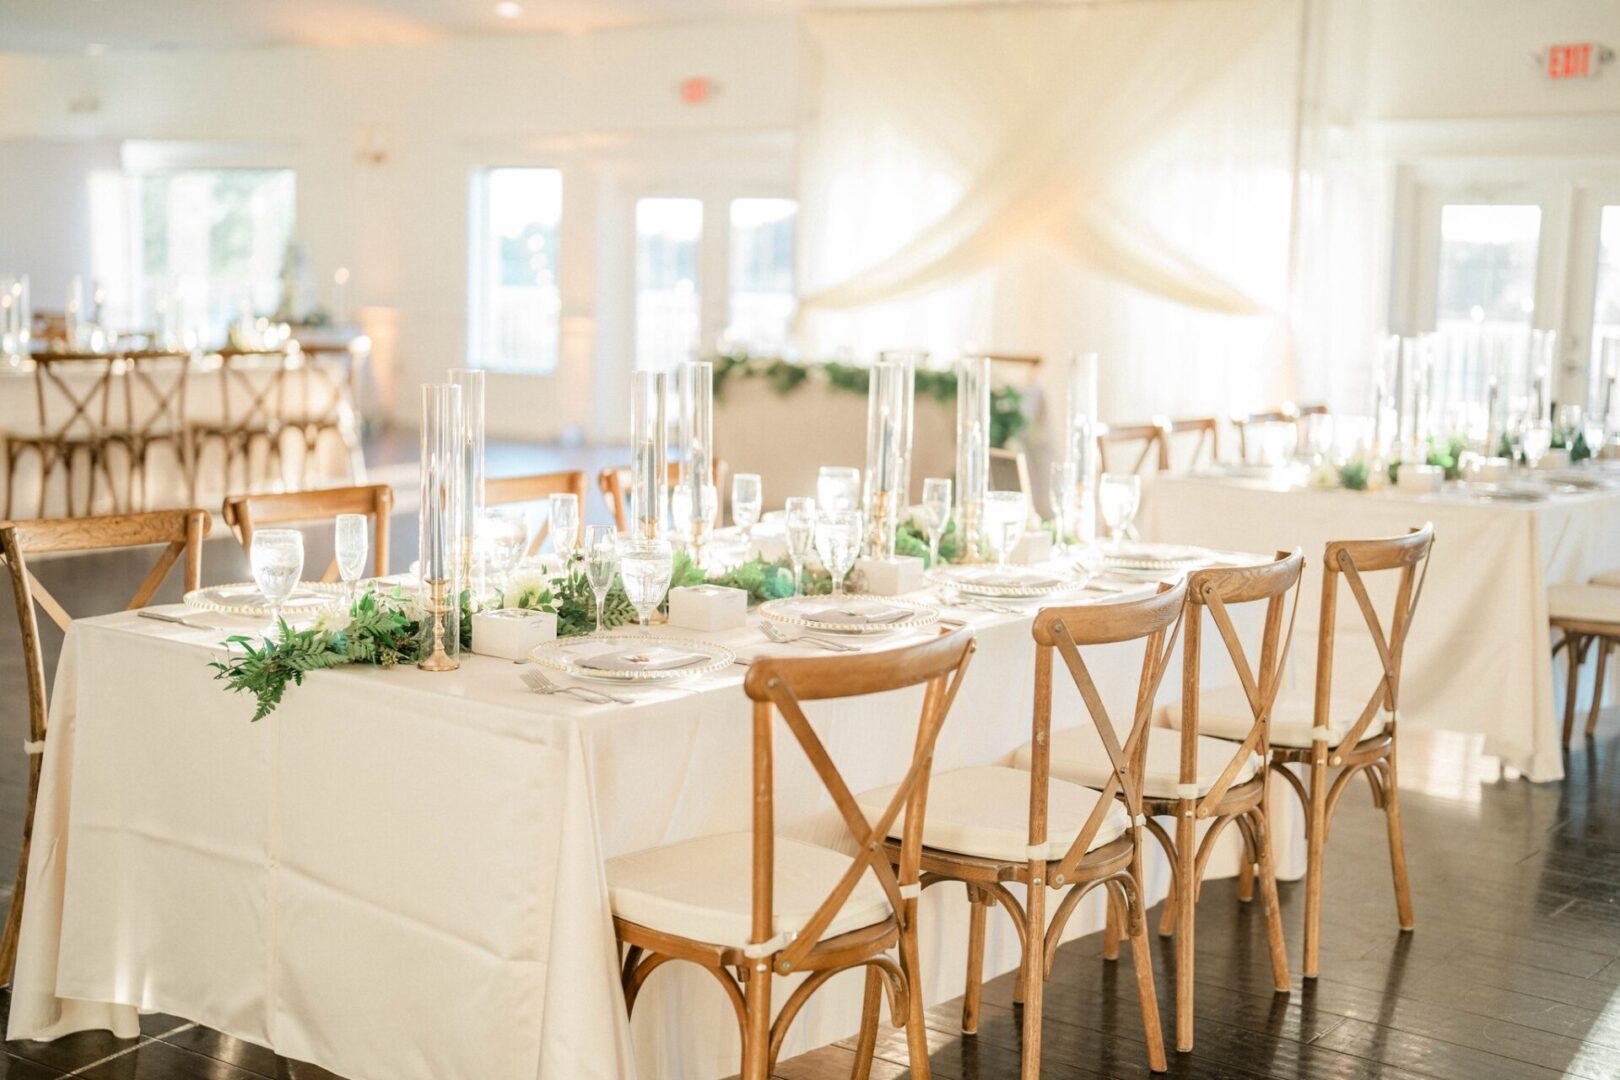 A White Themed Table With Wooden Chairs